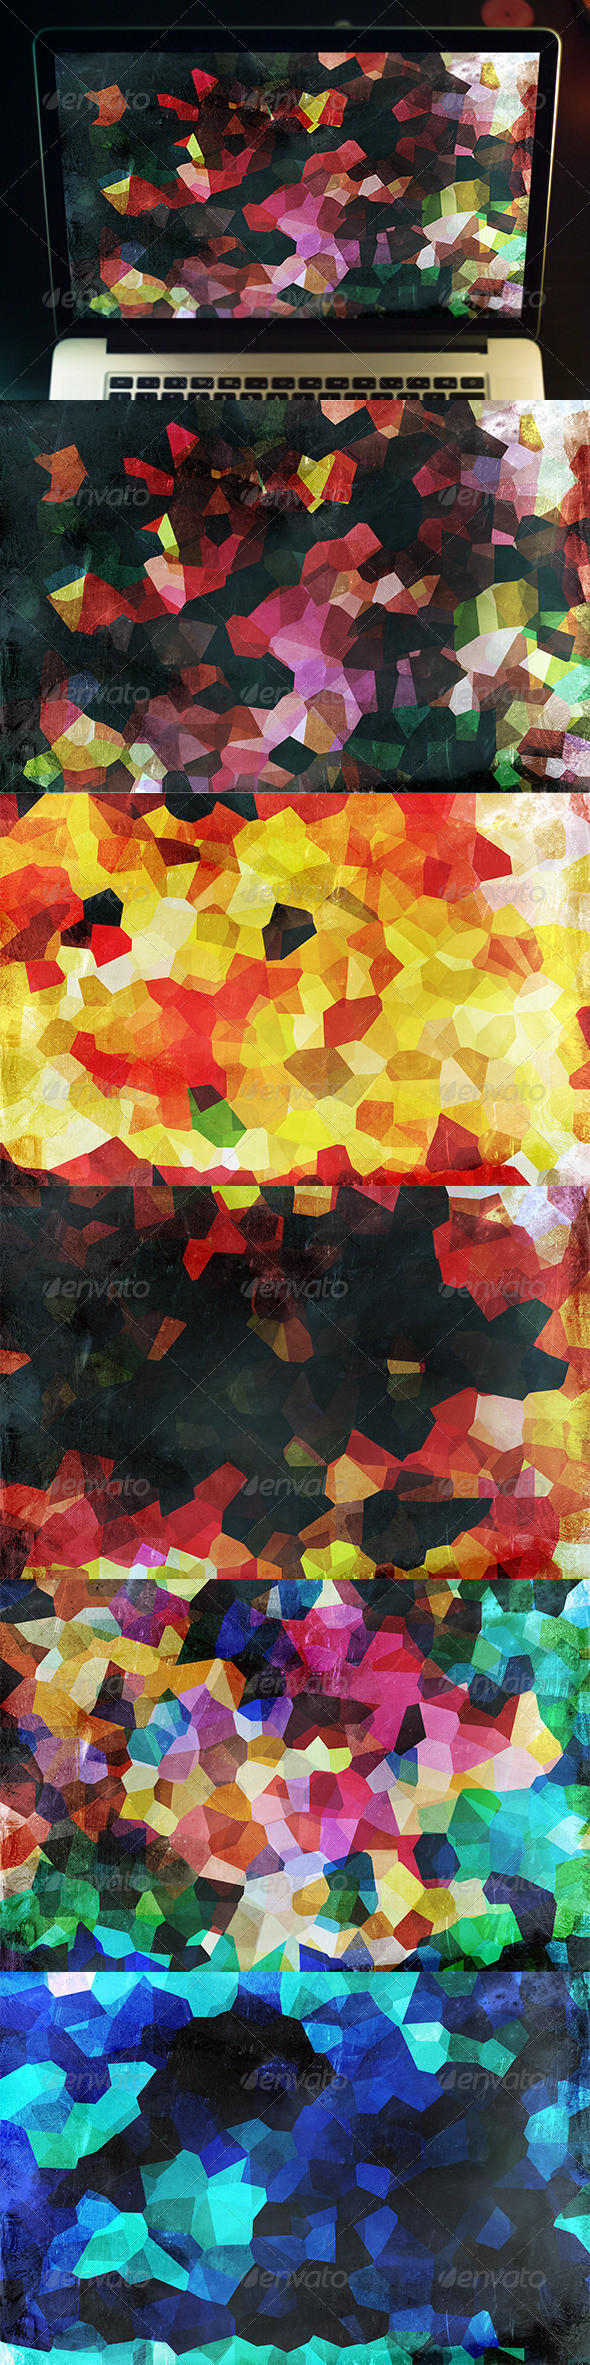 Grunge 20vintage 20geometric 20backgrounds 20preview 202